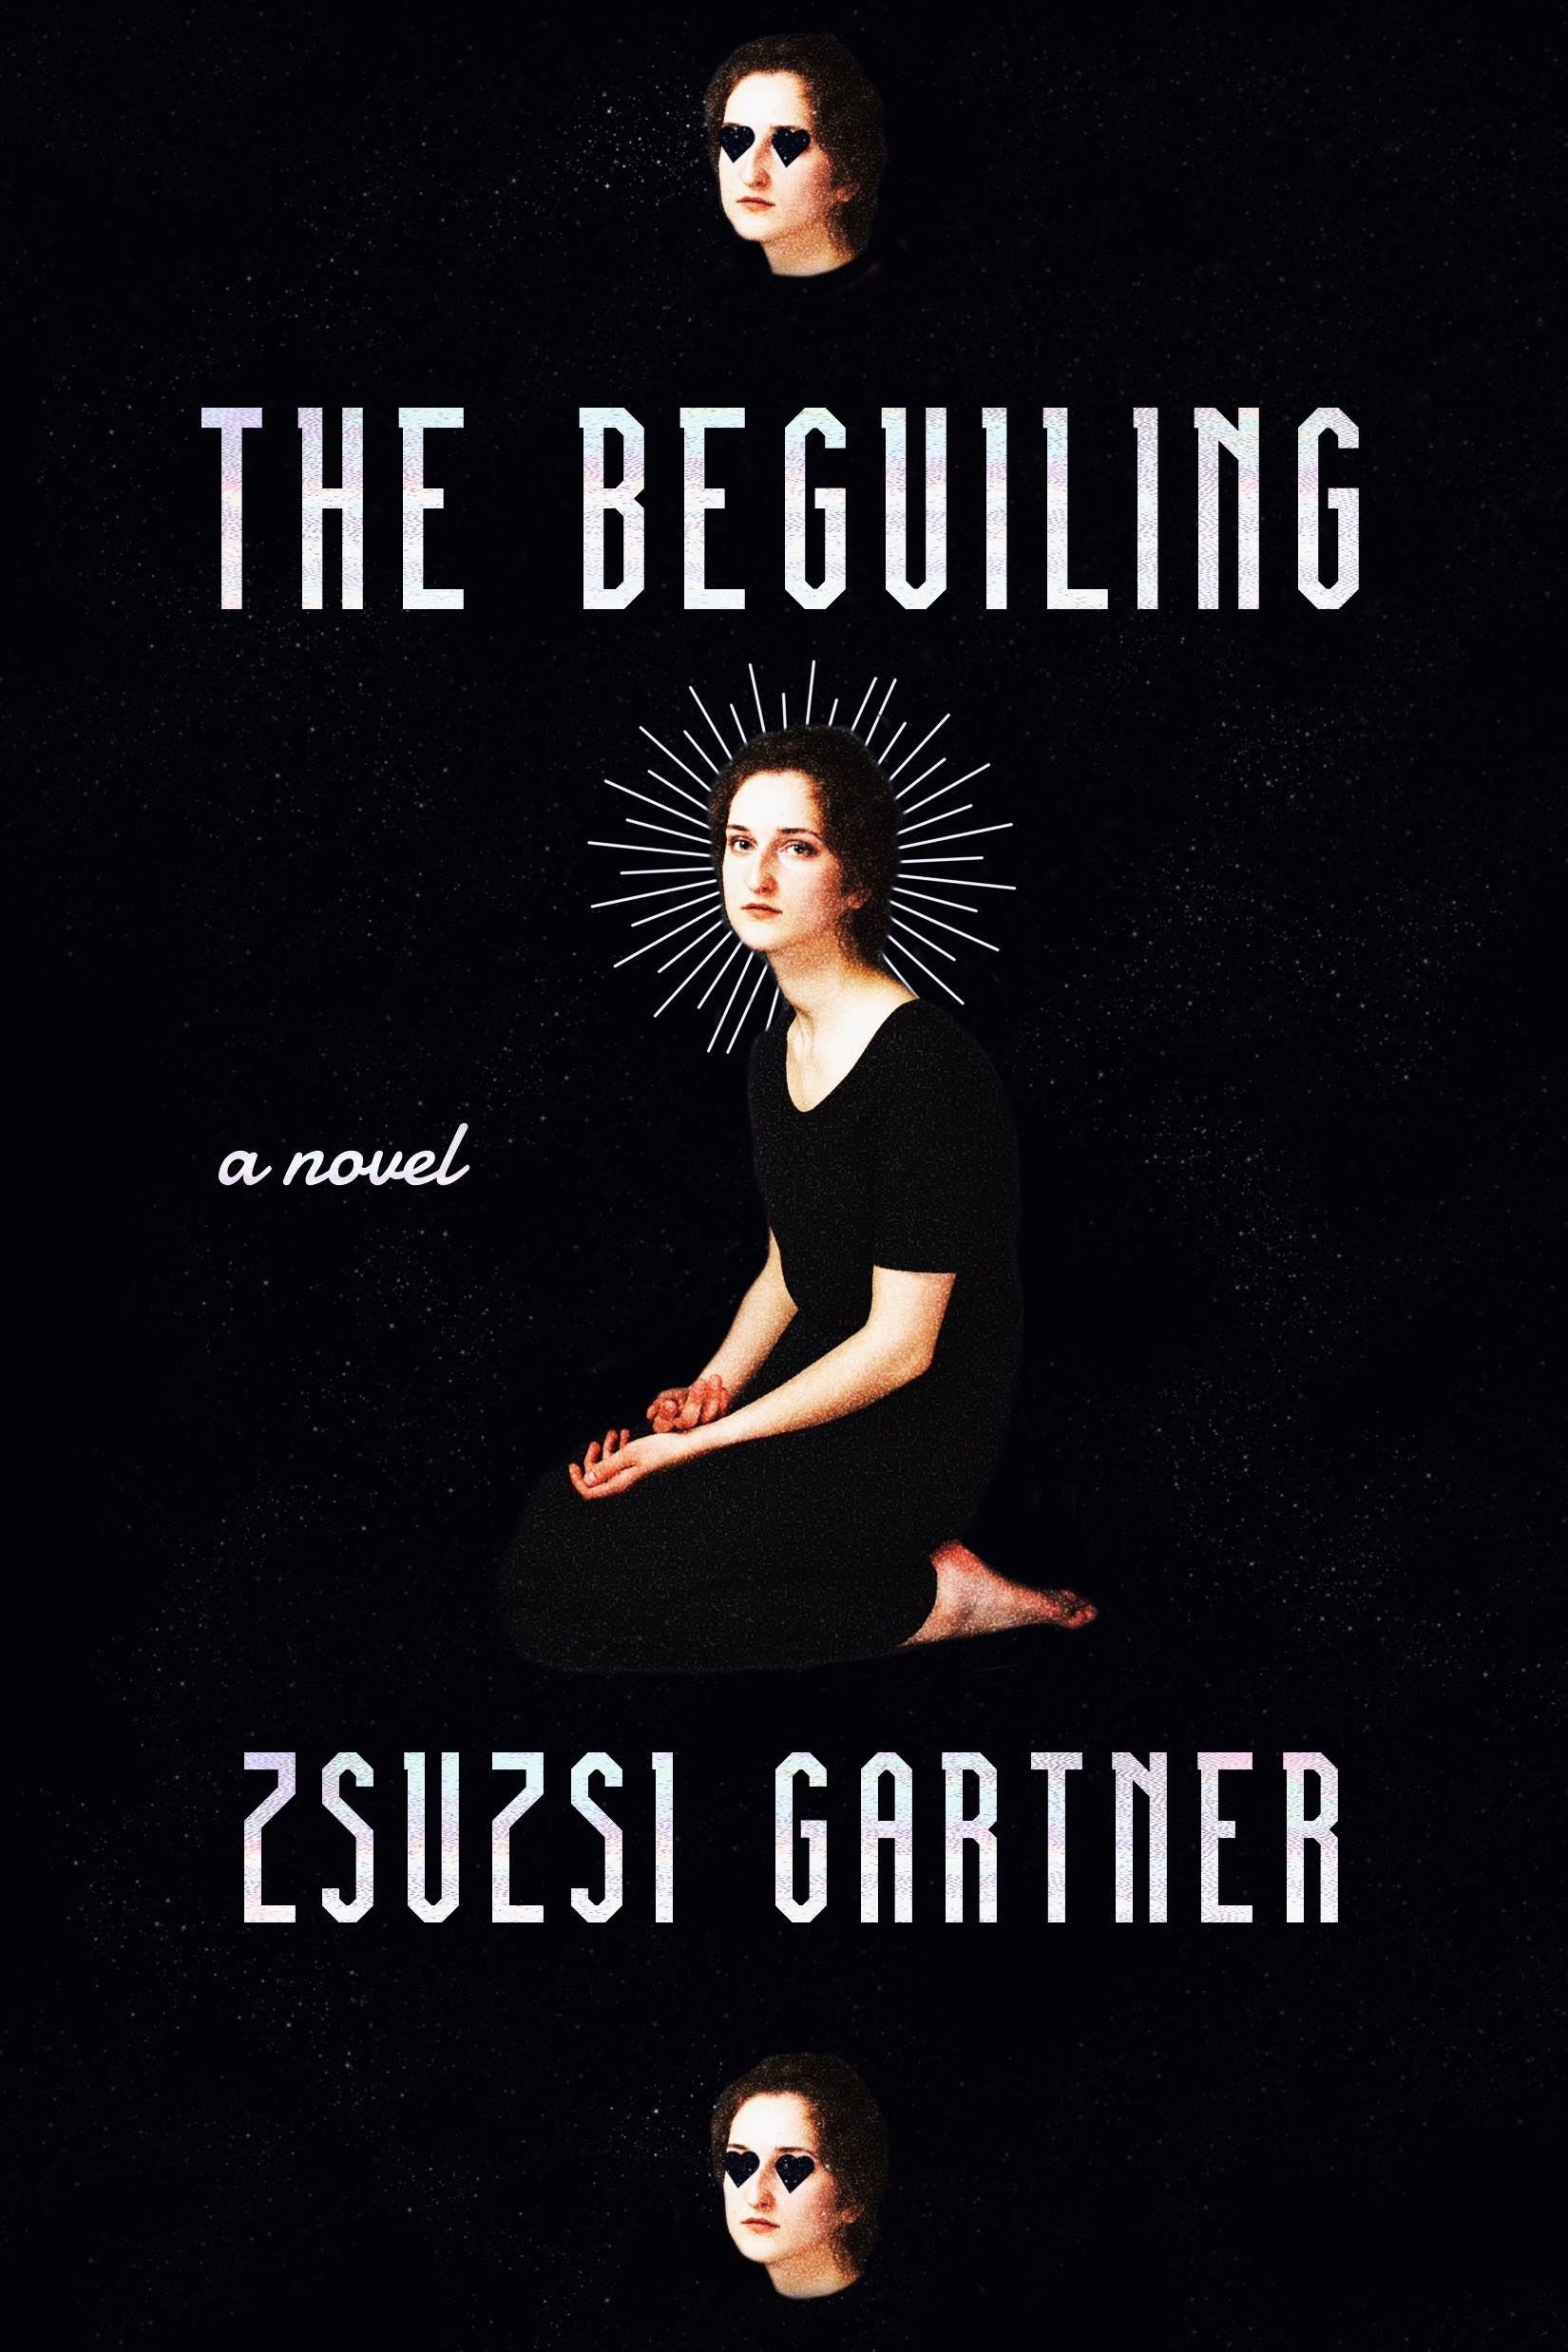 The Beguiling